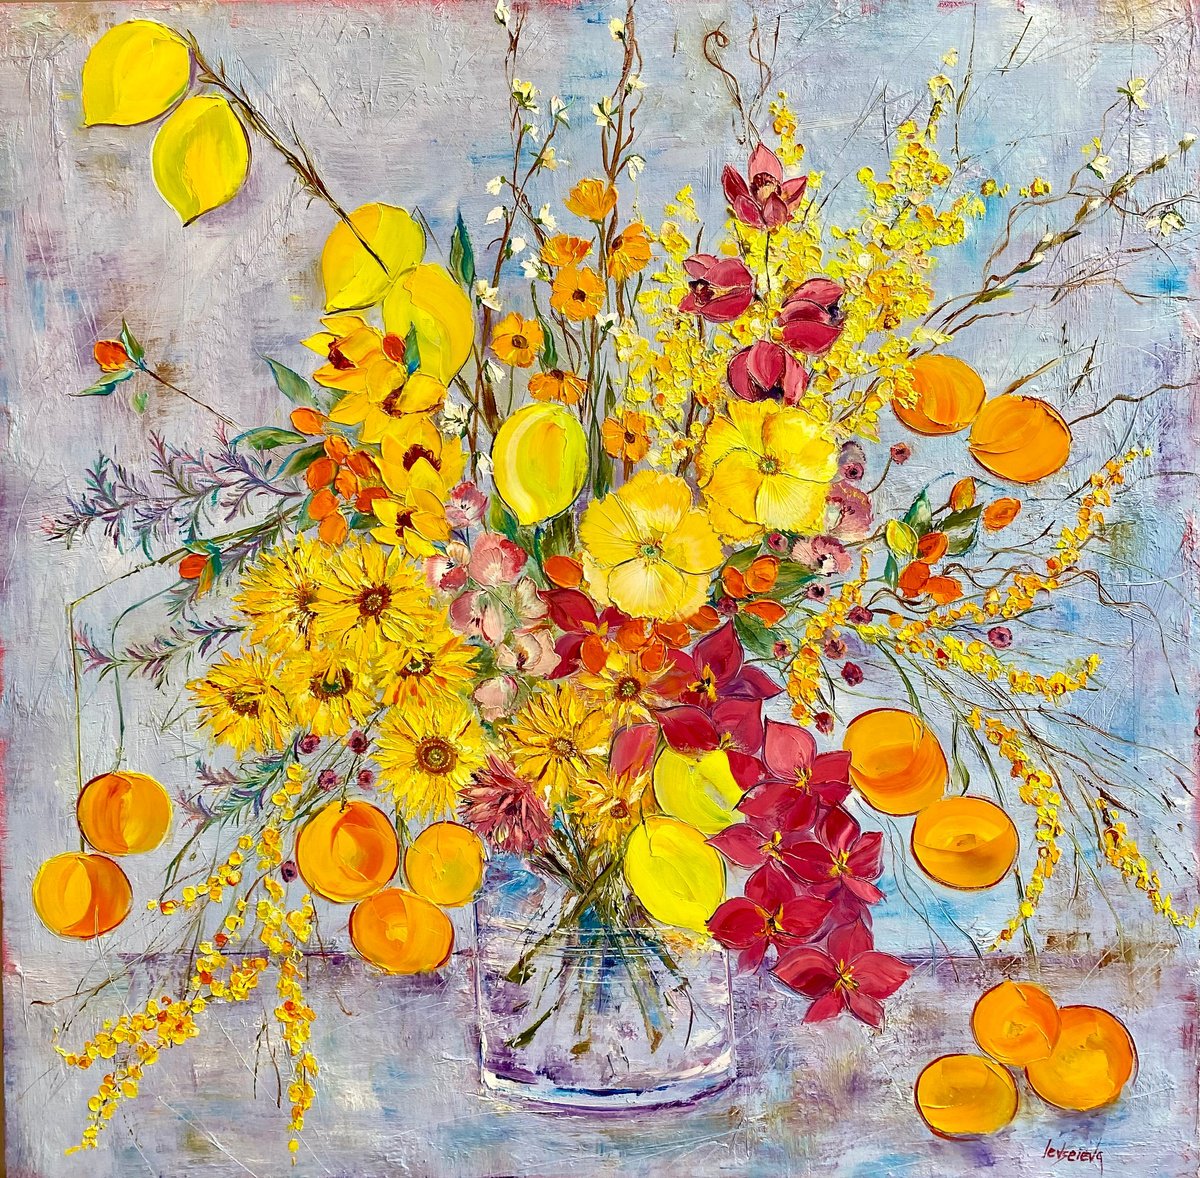 The Bouquet with lemons and tangerines by Oleksandra Ievseieva